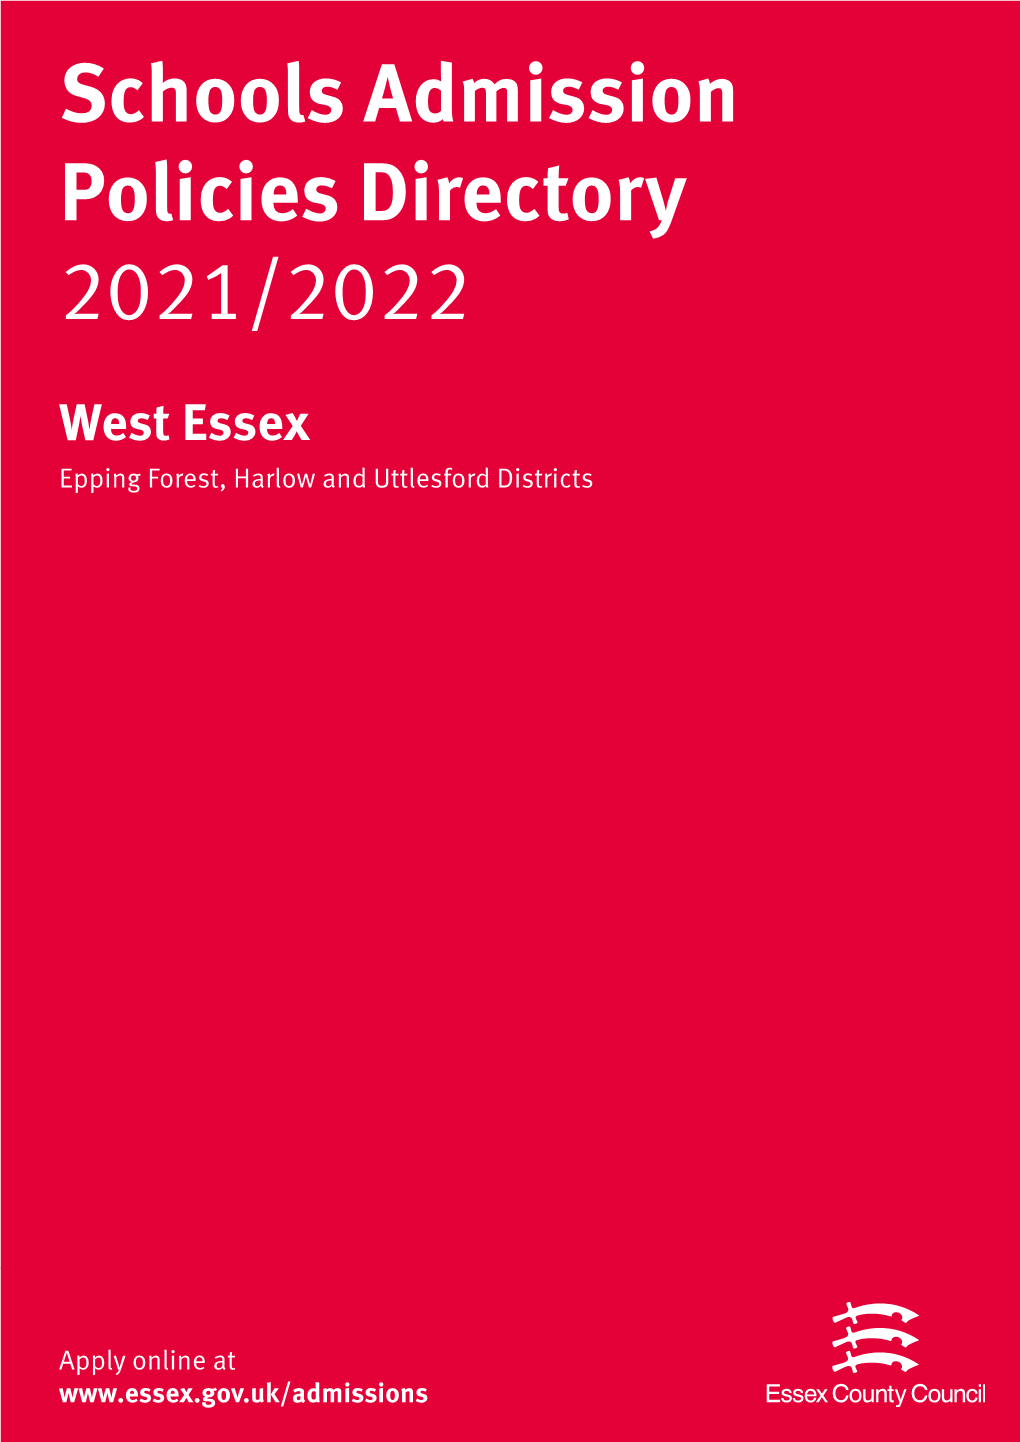 Essex County Council Primary School Admissions Brochure West Essex